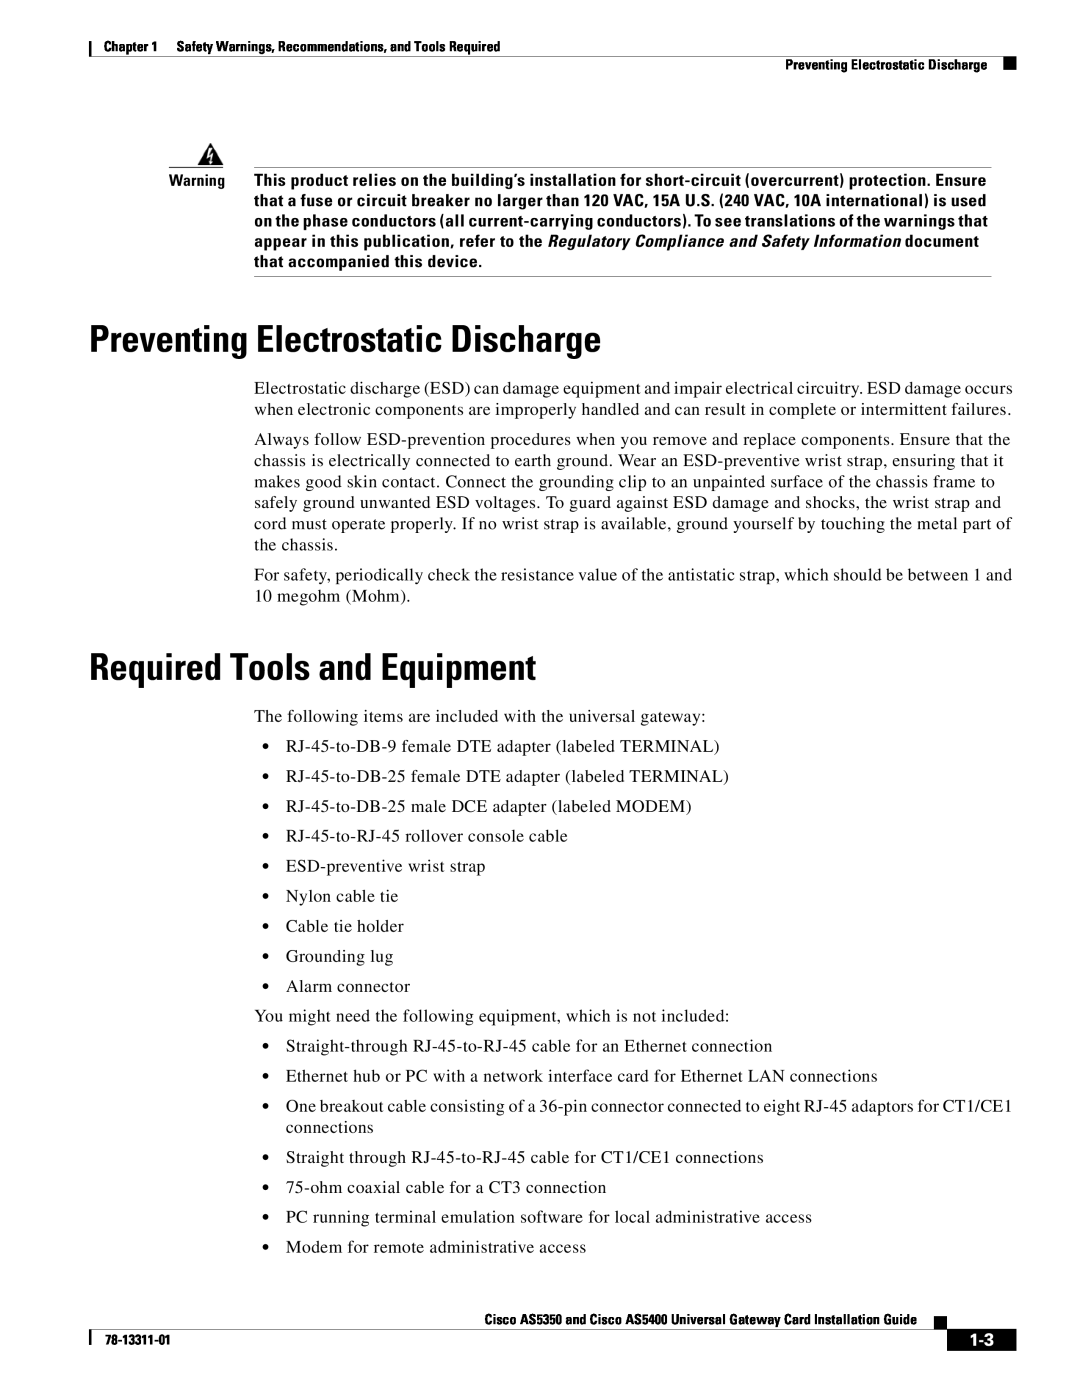 Cisco Systems AS5400 manual Preventing Electrostatic Discharge, Required Tools and Equipment 